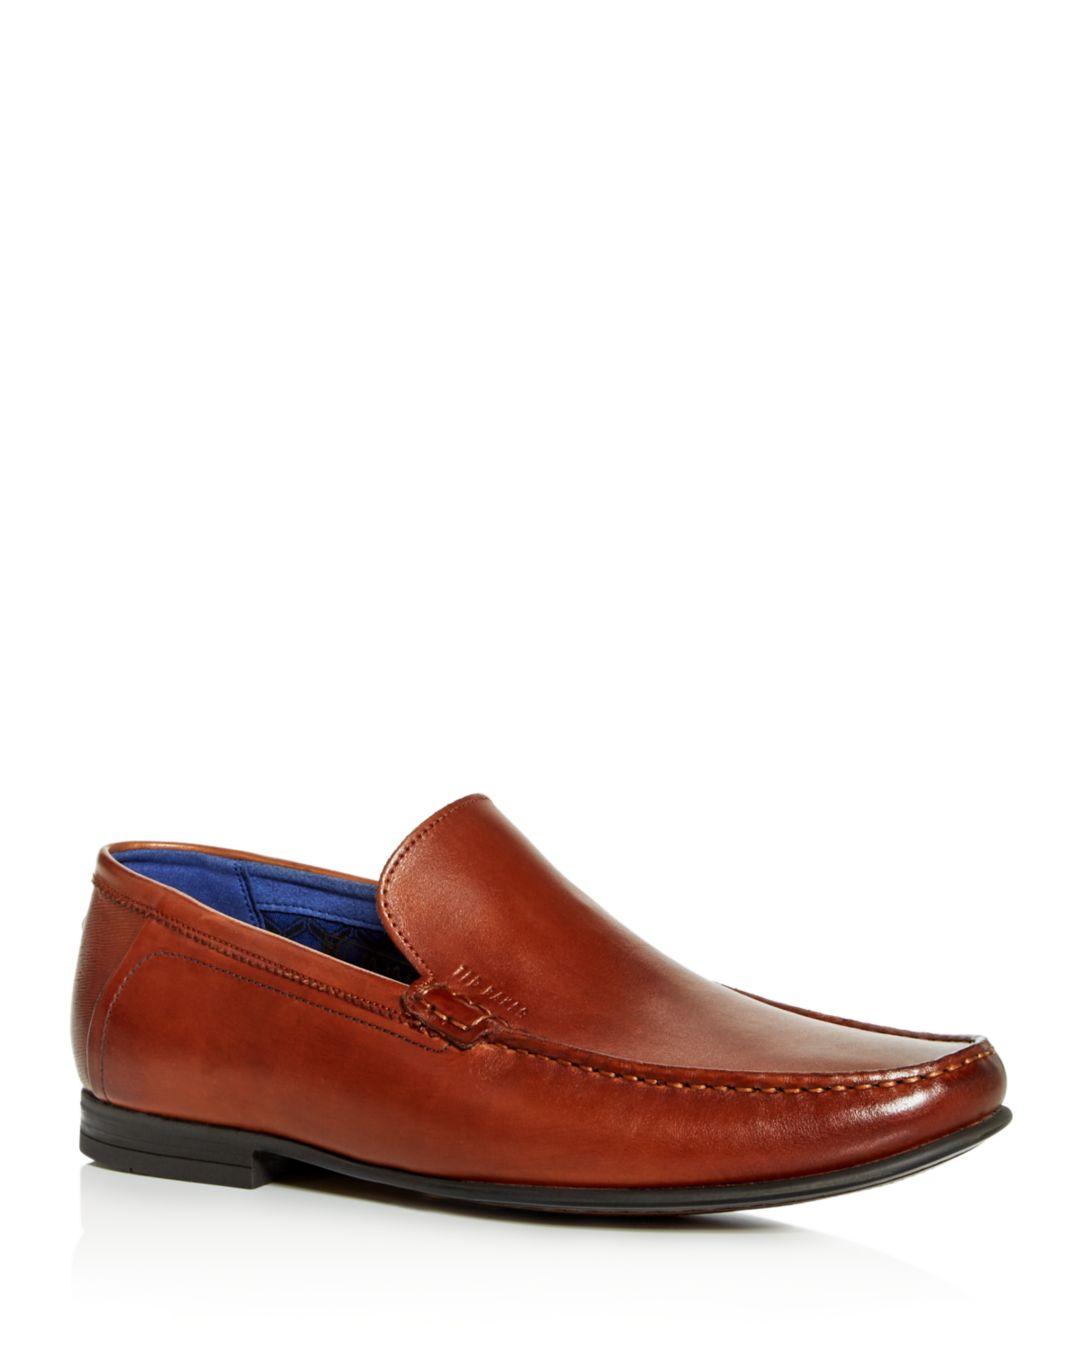 Ted Baker Men's Lassil Leather Moc - Toe Loafers in Brown for Men - Lyst